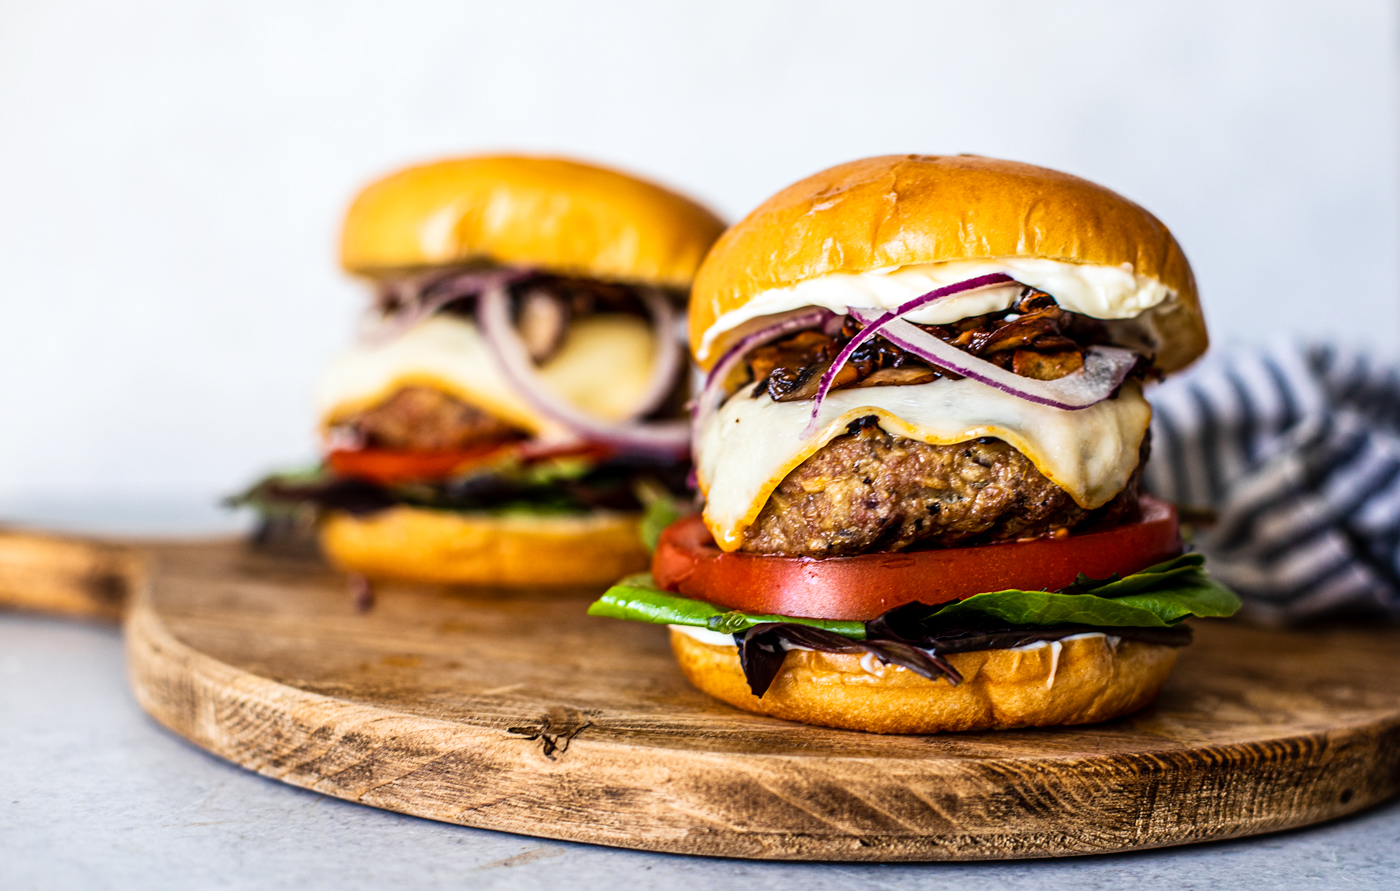 The best turkey burger served on a serving board.